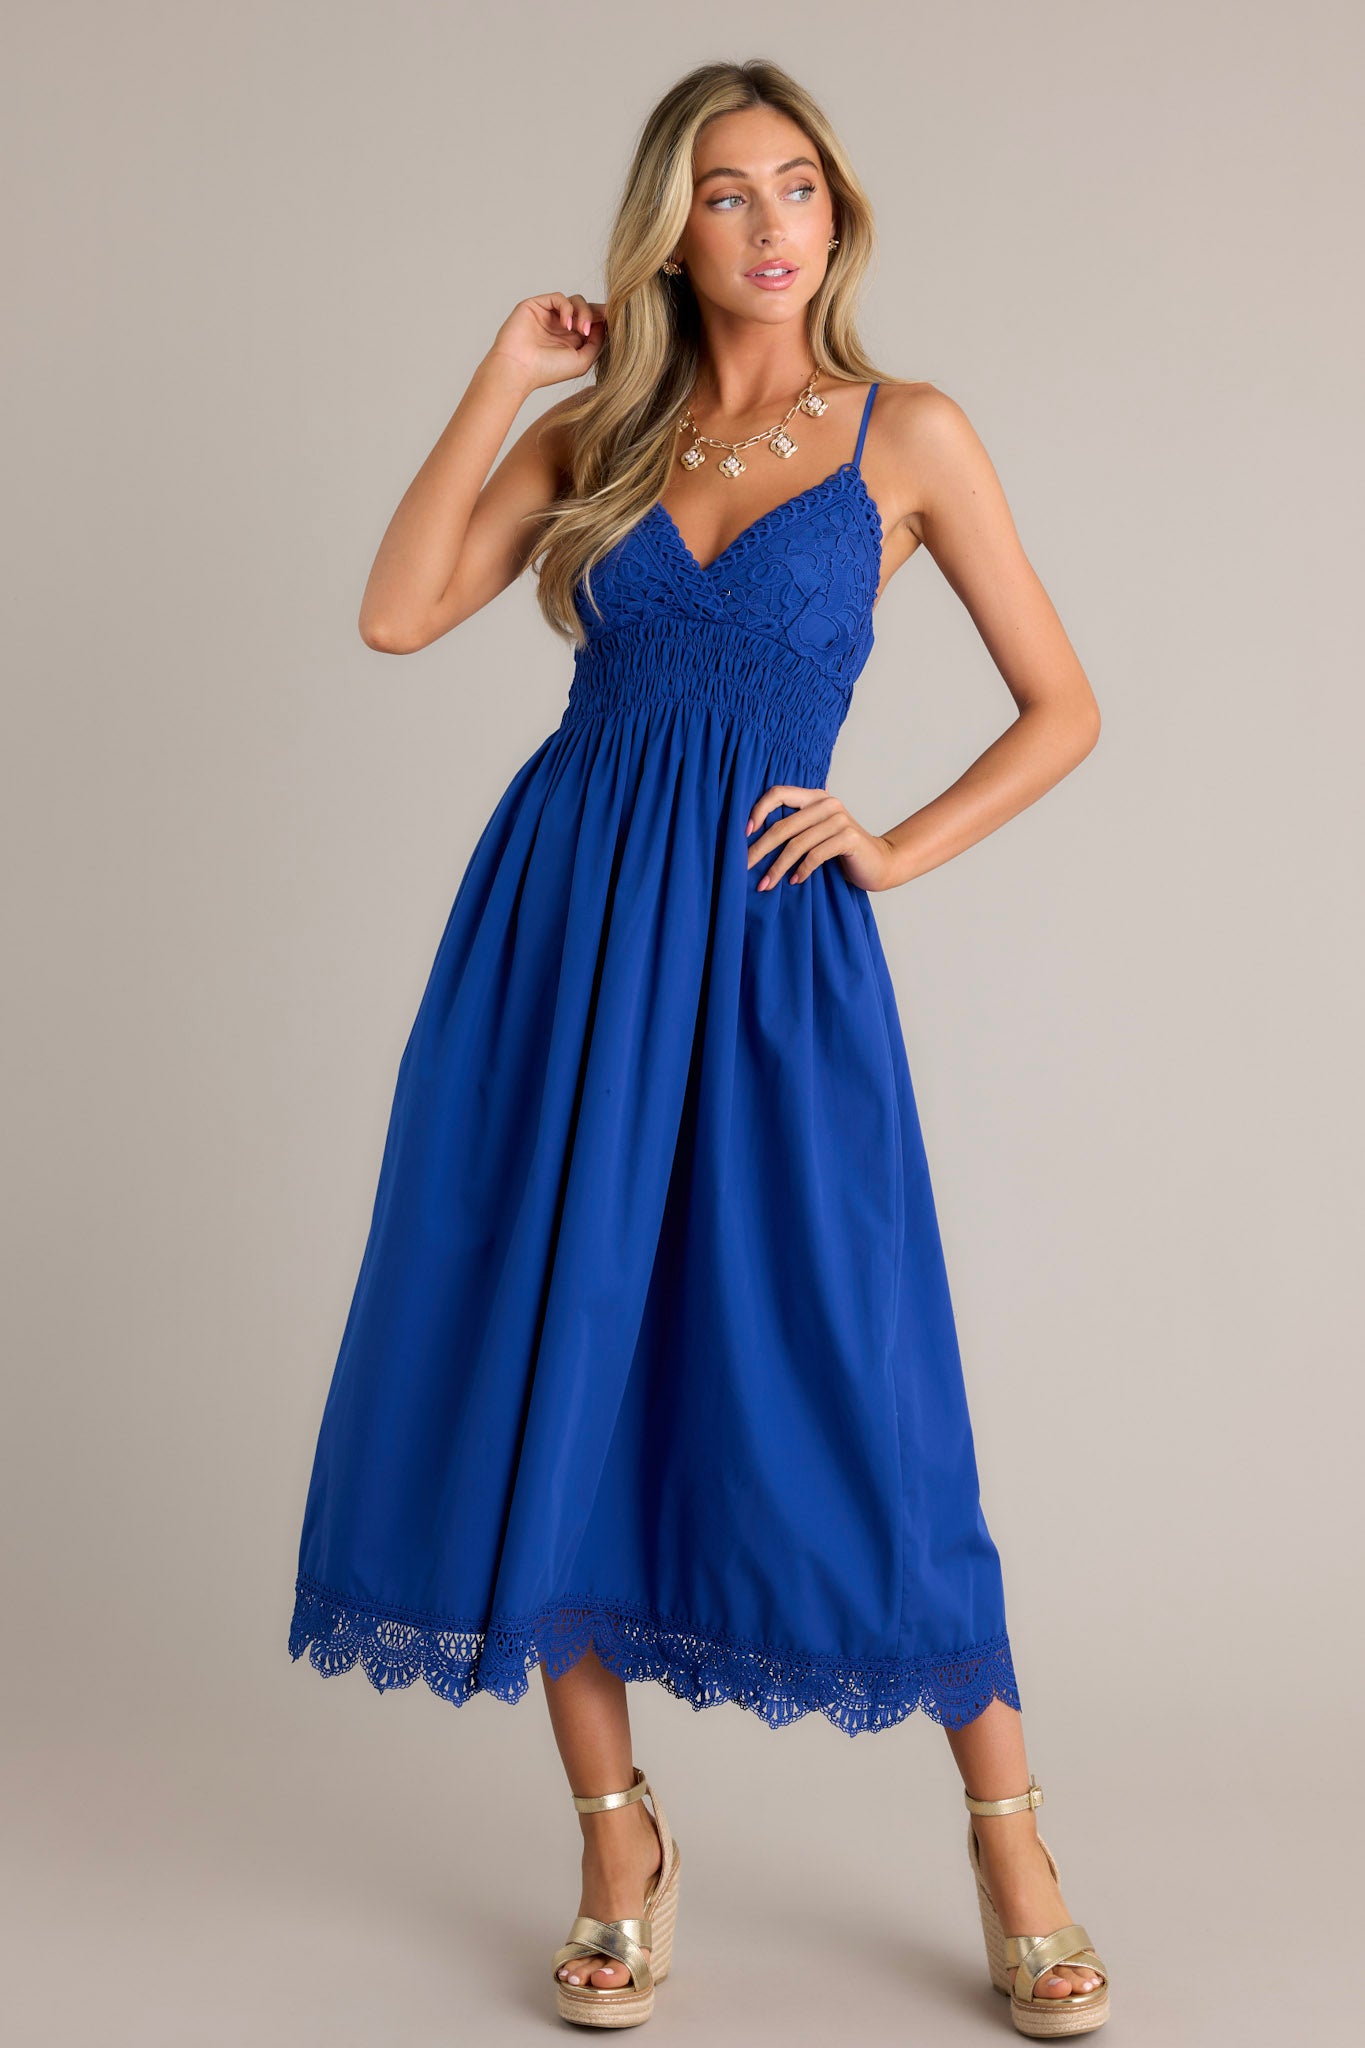 This blue maxi dress features a v-neckline, thin adjustable straps, a lace bust, a fully smocked waist & back, a flowing silhouette, and a lace hemline.